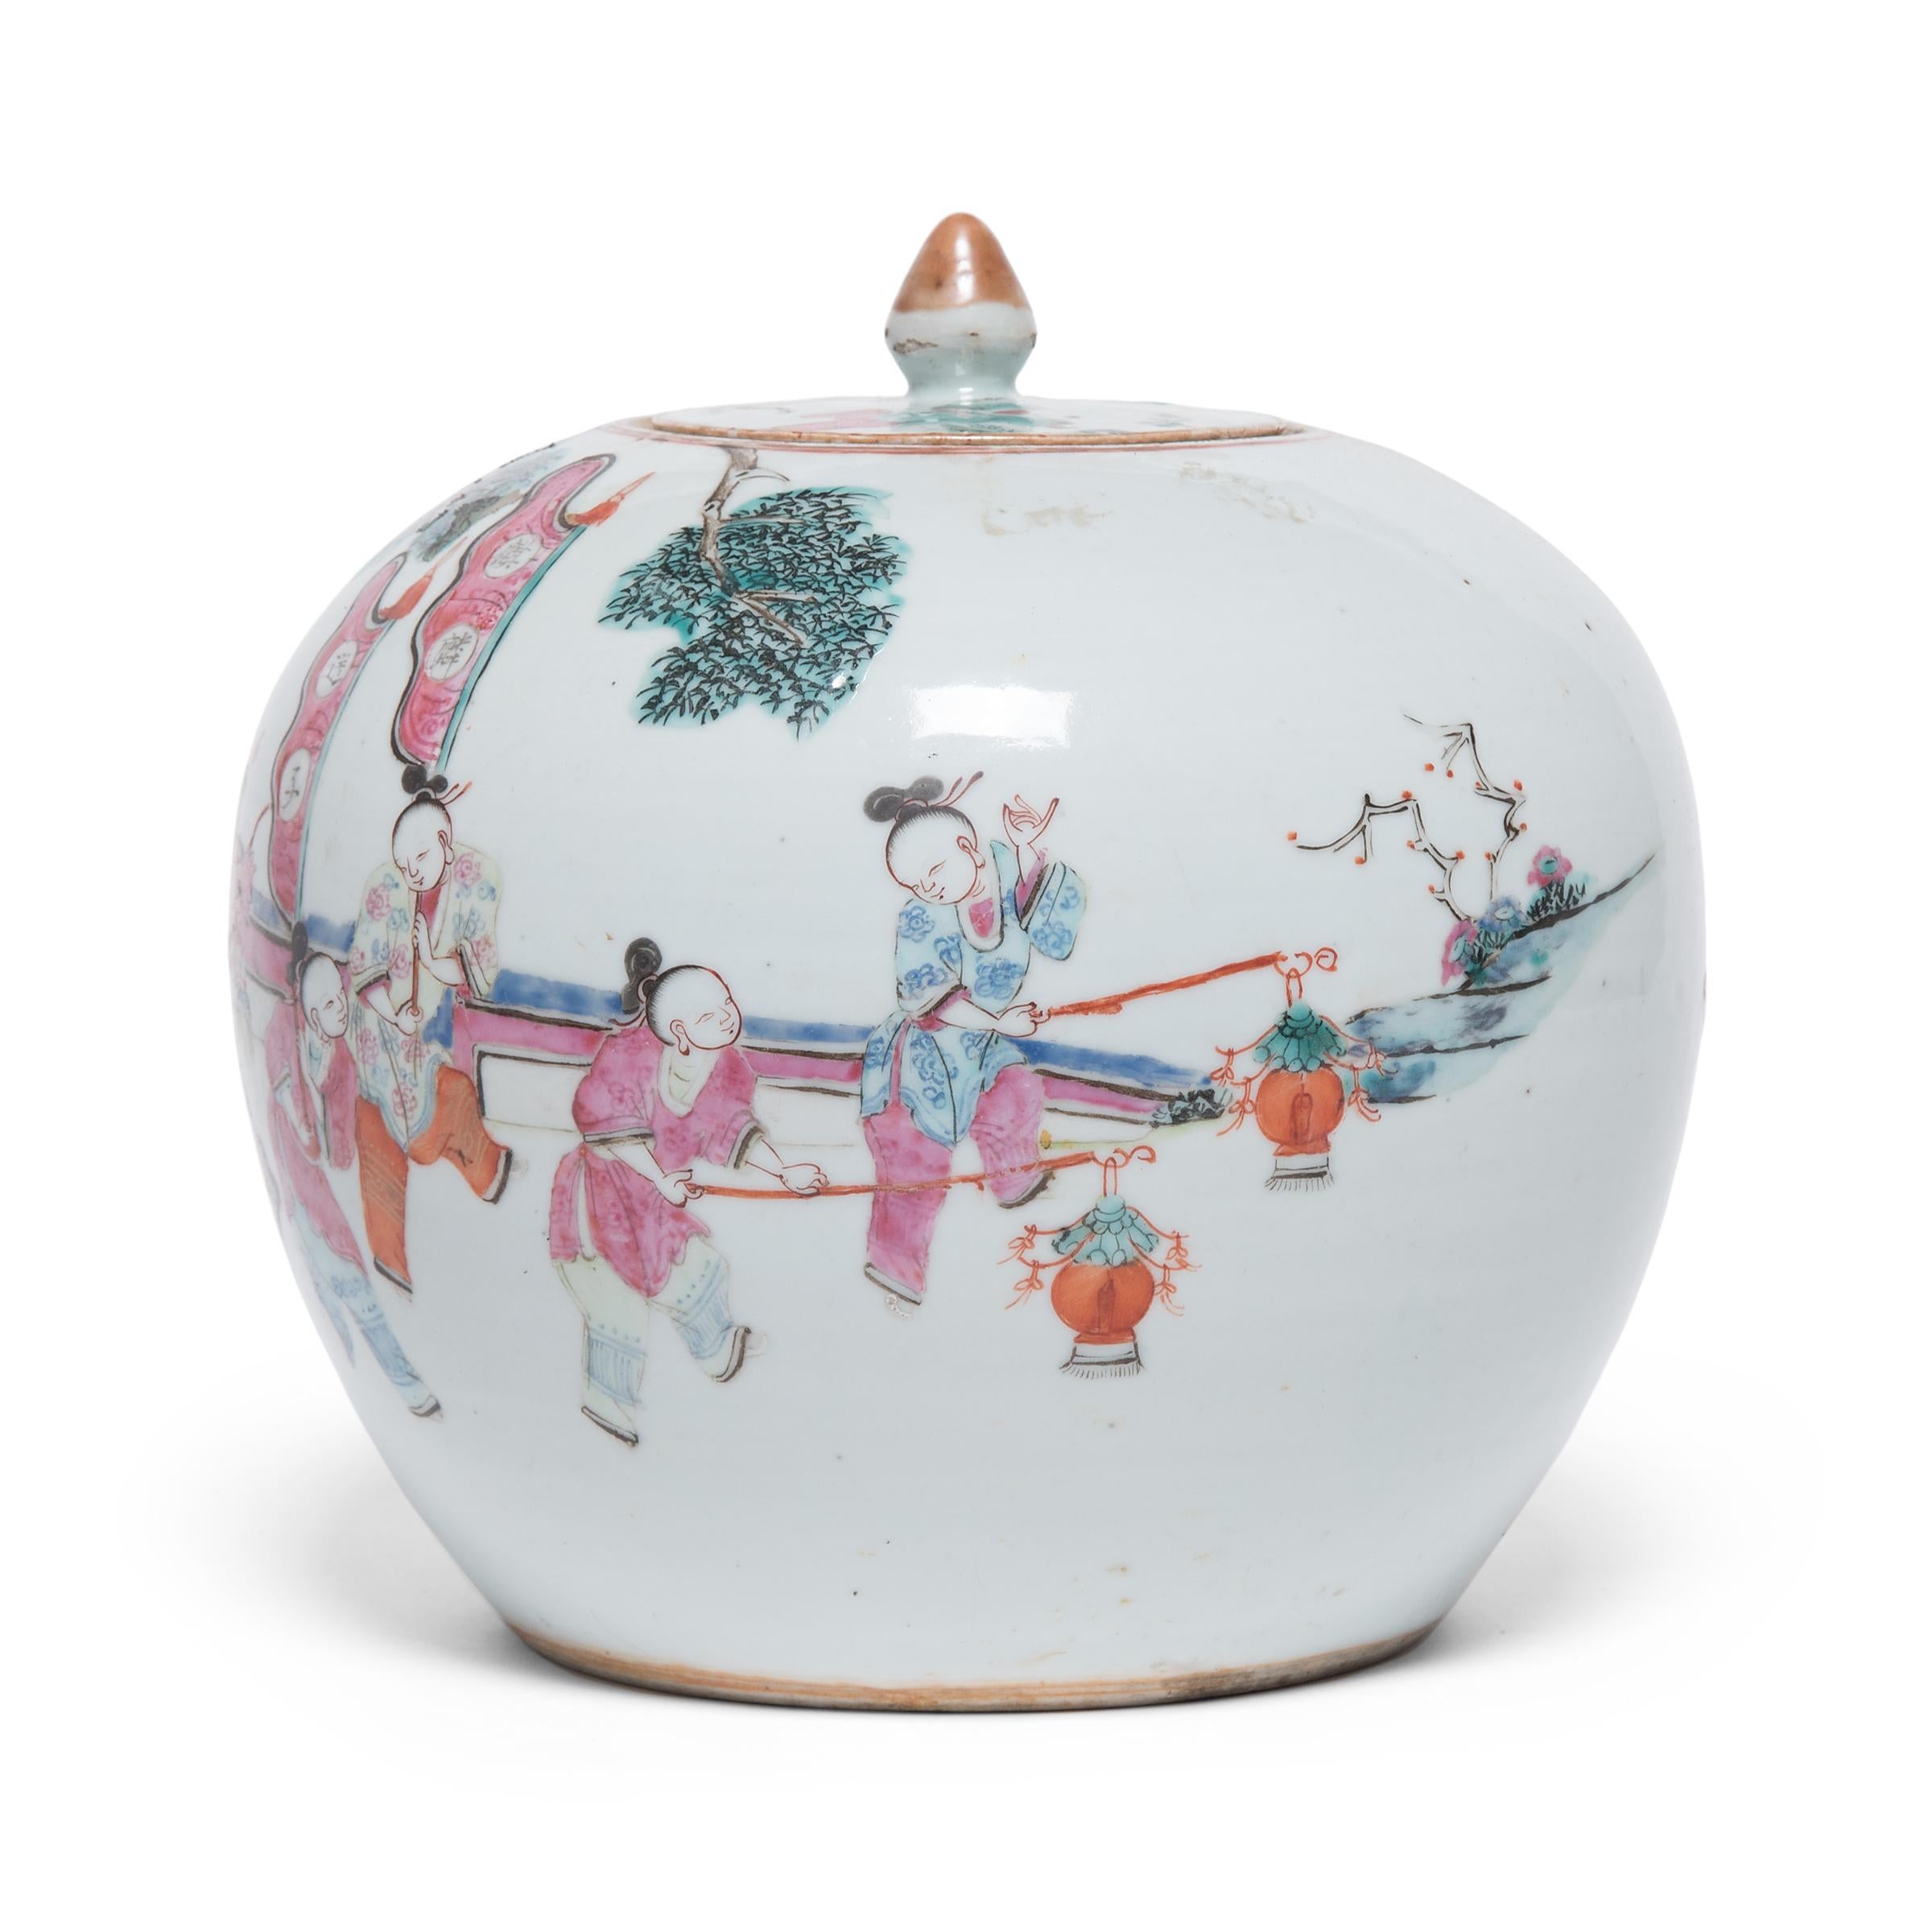 During the 18th century, Europeans provided an eager market for Chinese export porcelain, especially the colorful and fanciful ware known as “famille rose.” Named for a palette of opaque overglaze enamels that favored roses and pinks, famille rose